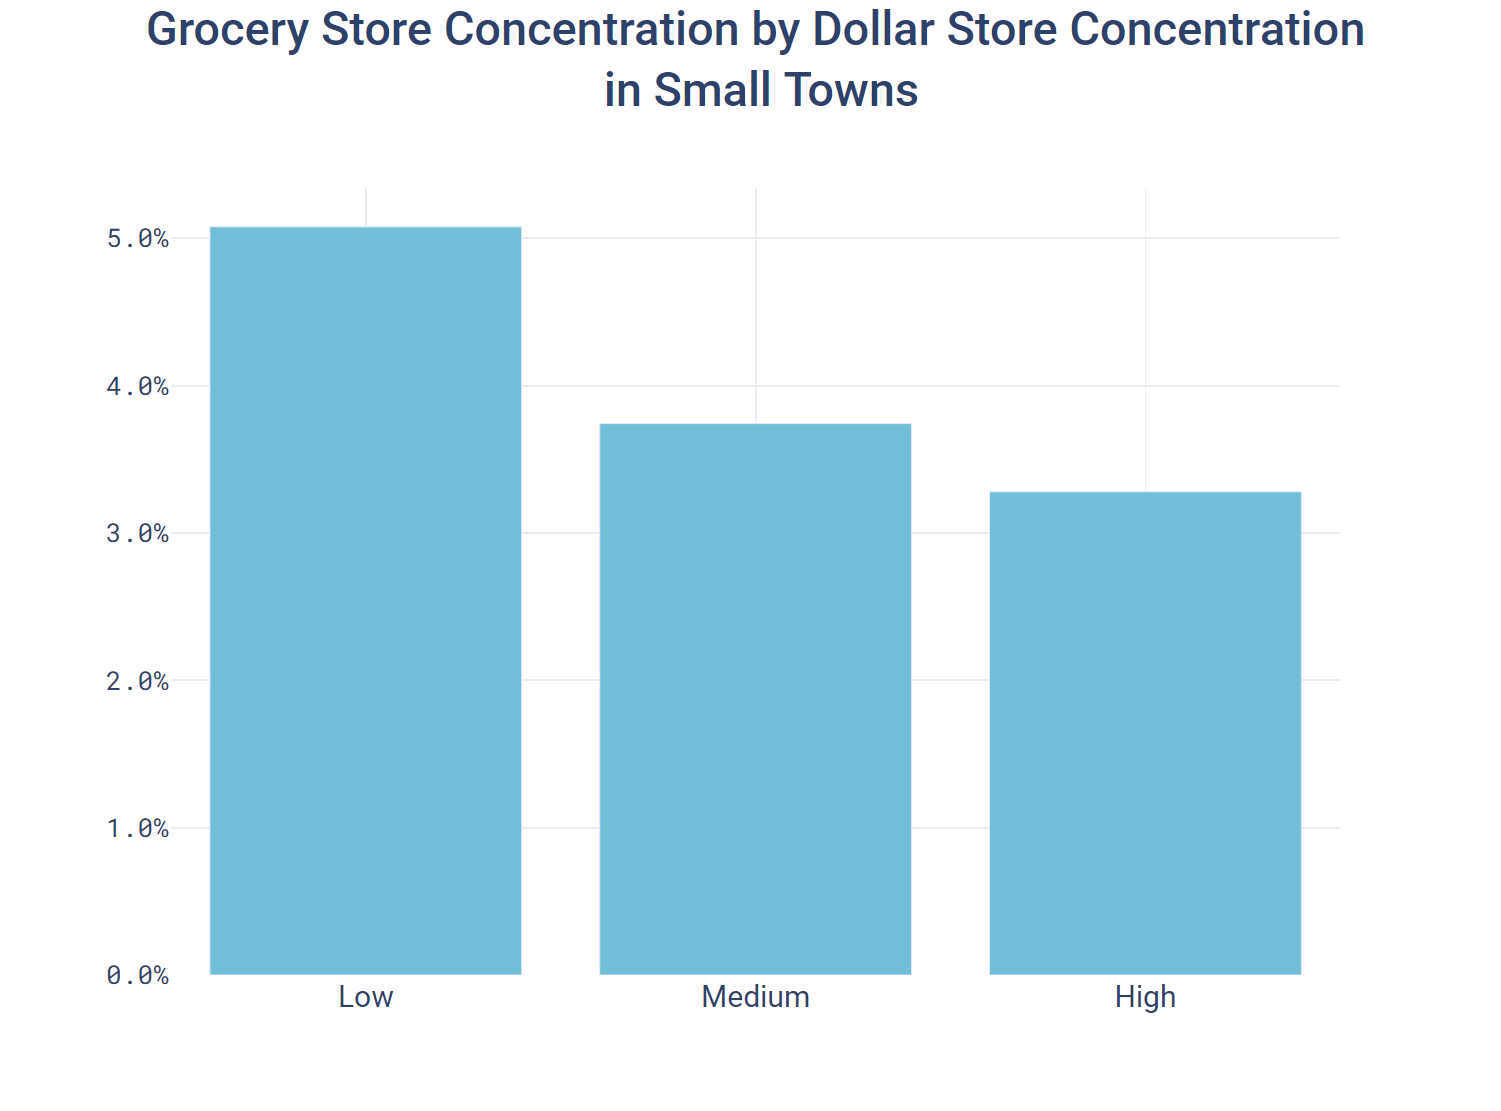 Grocery Store Concentration by Dollar Store Concentration in Small Towns